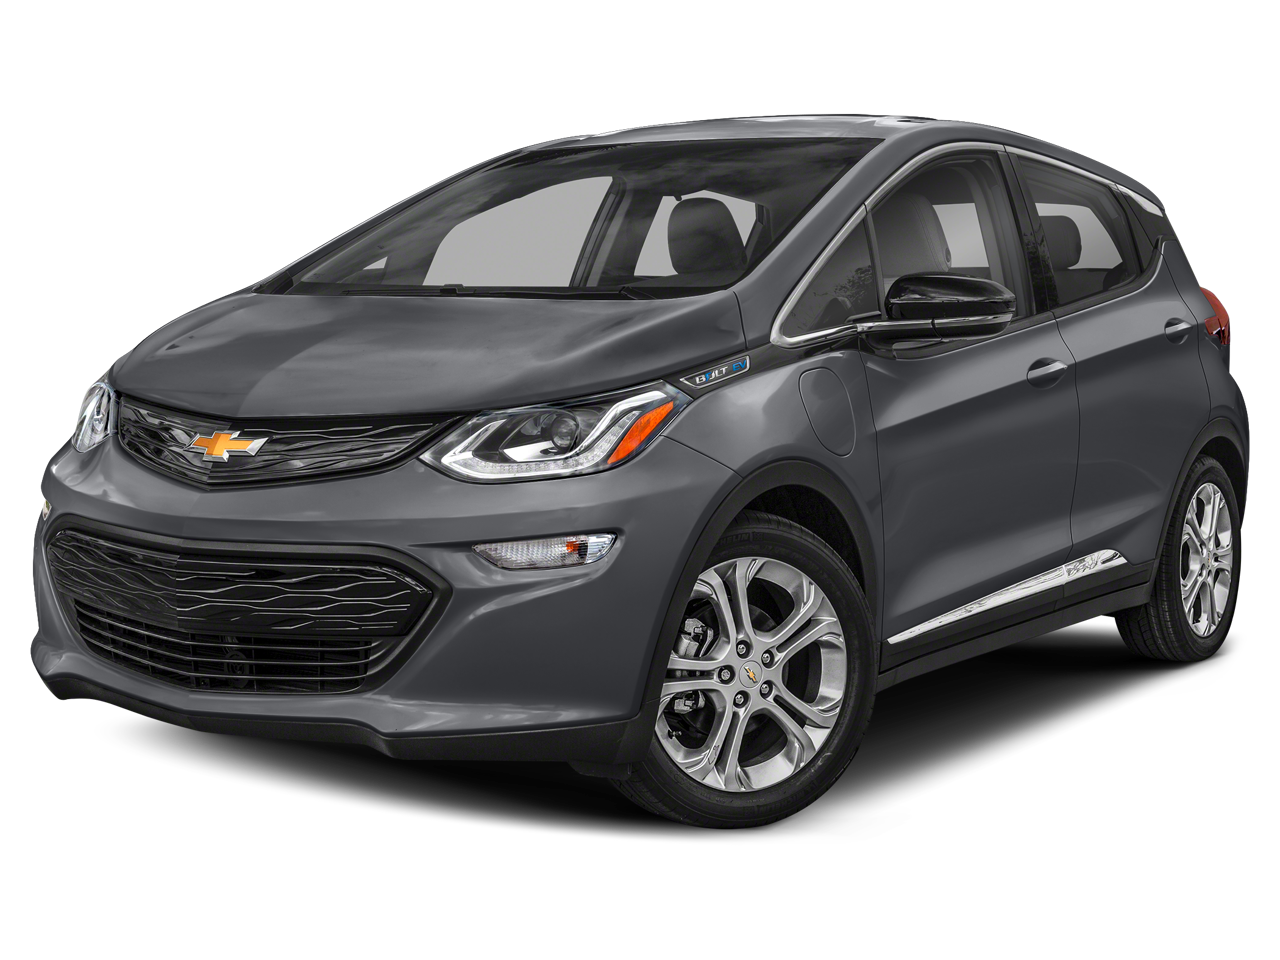 Used 2021 Chevrolet Bolt EV LT with VIN 1G1FY6S09M4111768 for sale in Thousand Oaks, CA